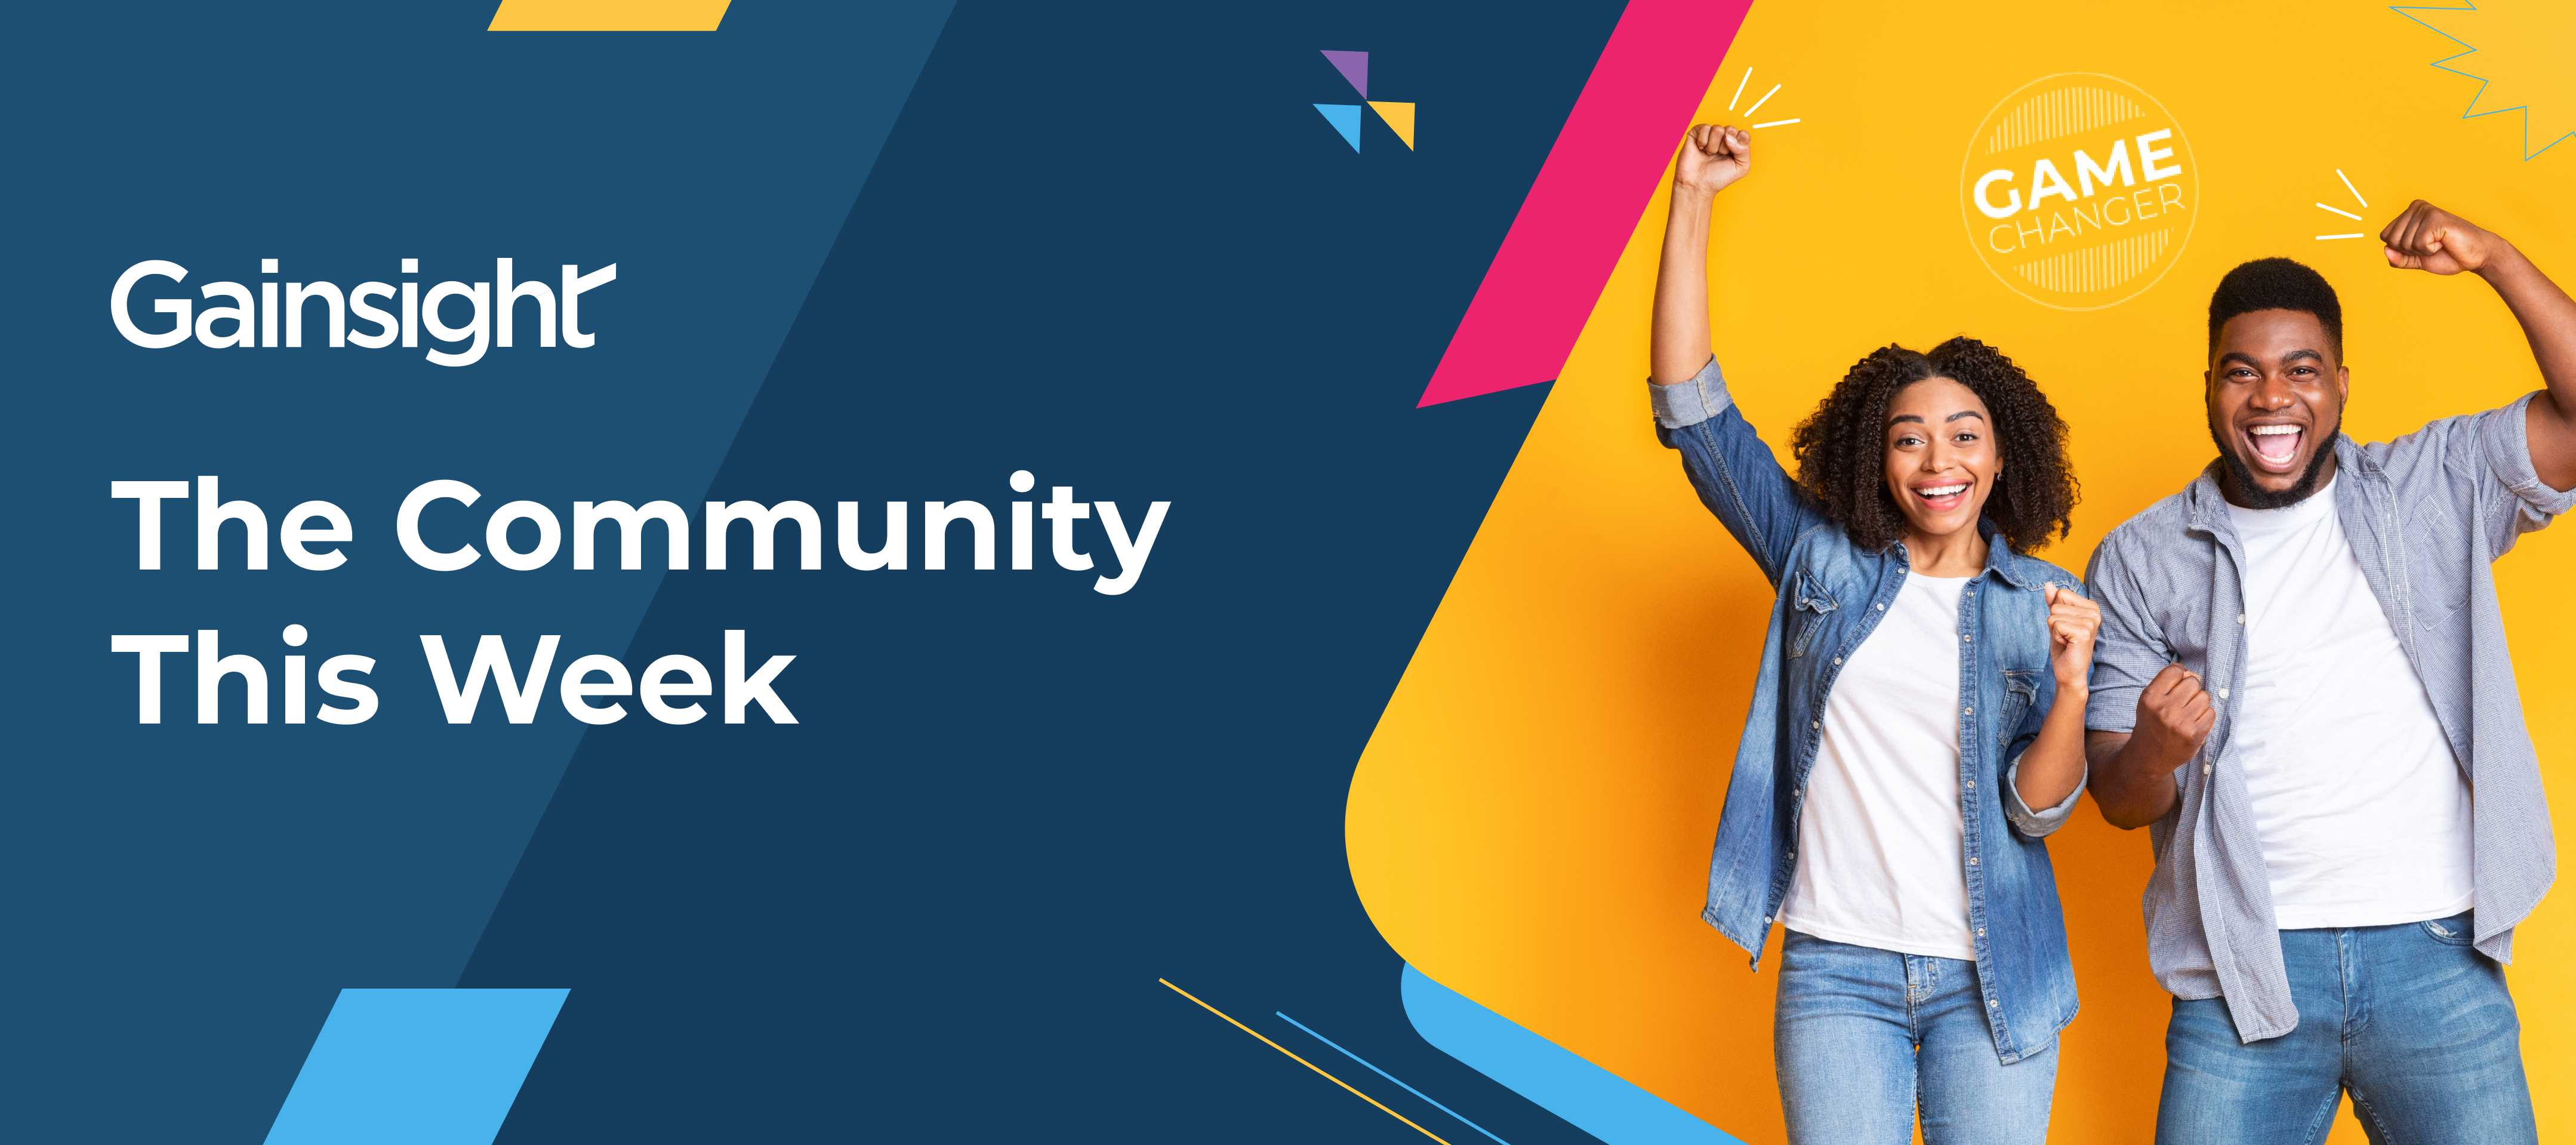 The Community This Week: A Unified Gainsight Support Experience